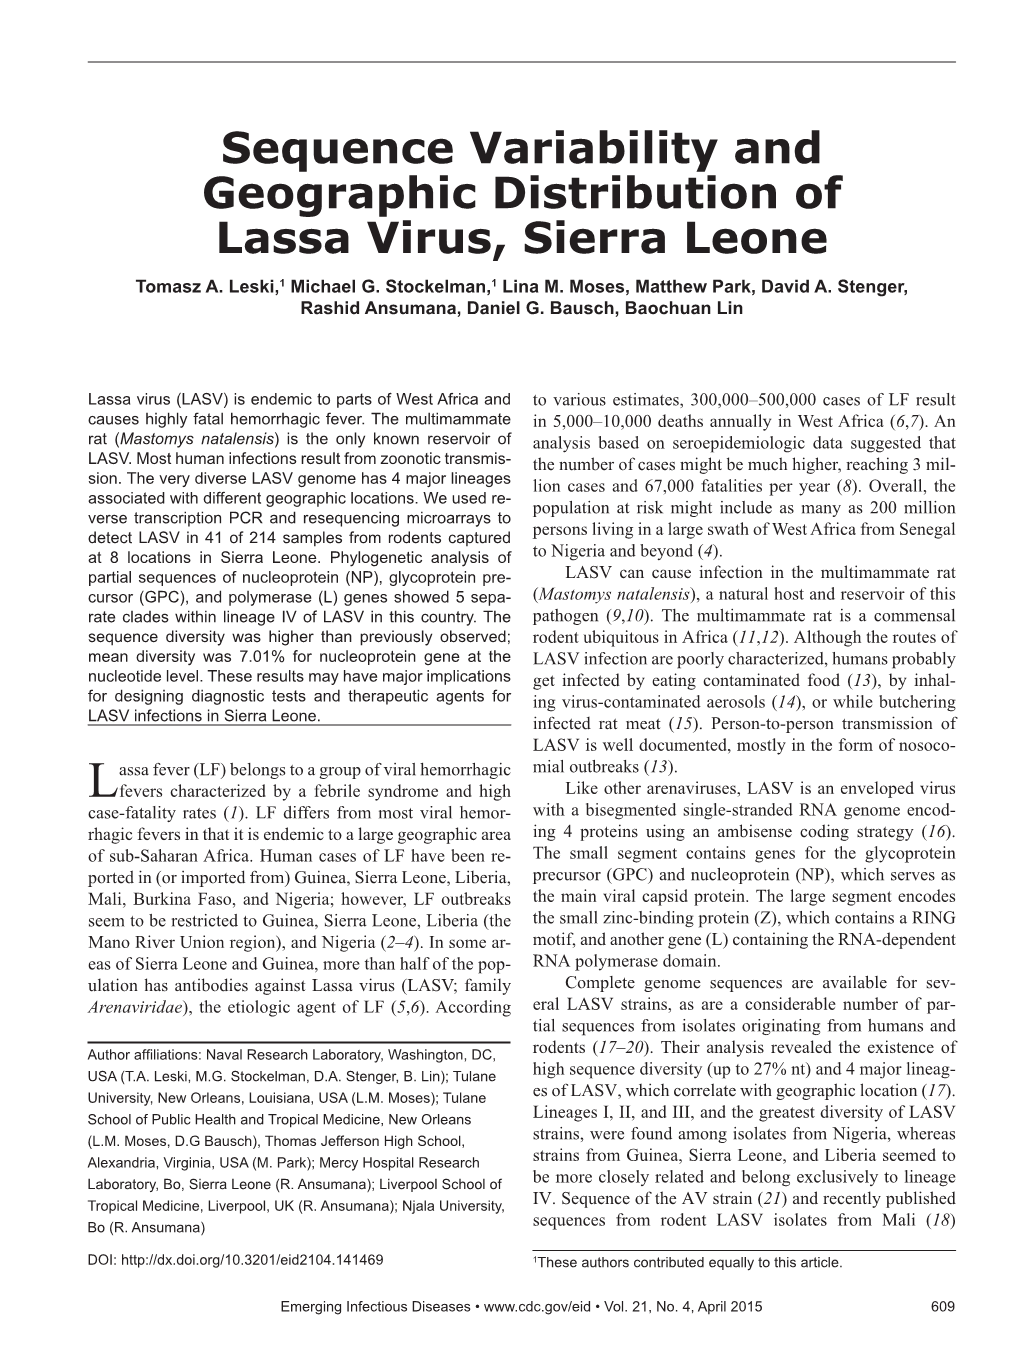 Sequence Variability and Geographic Distribution of Lassa Virus, Sierra Leone Tomasz A